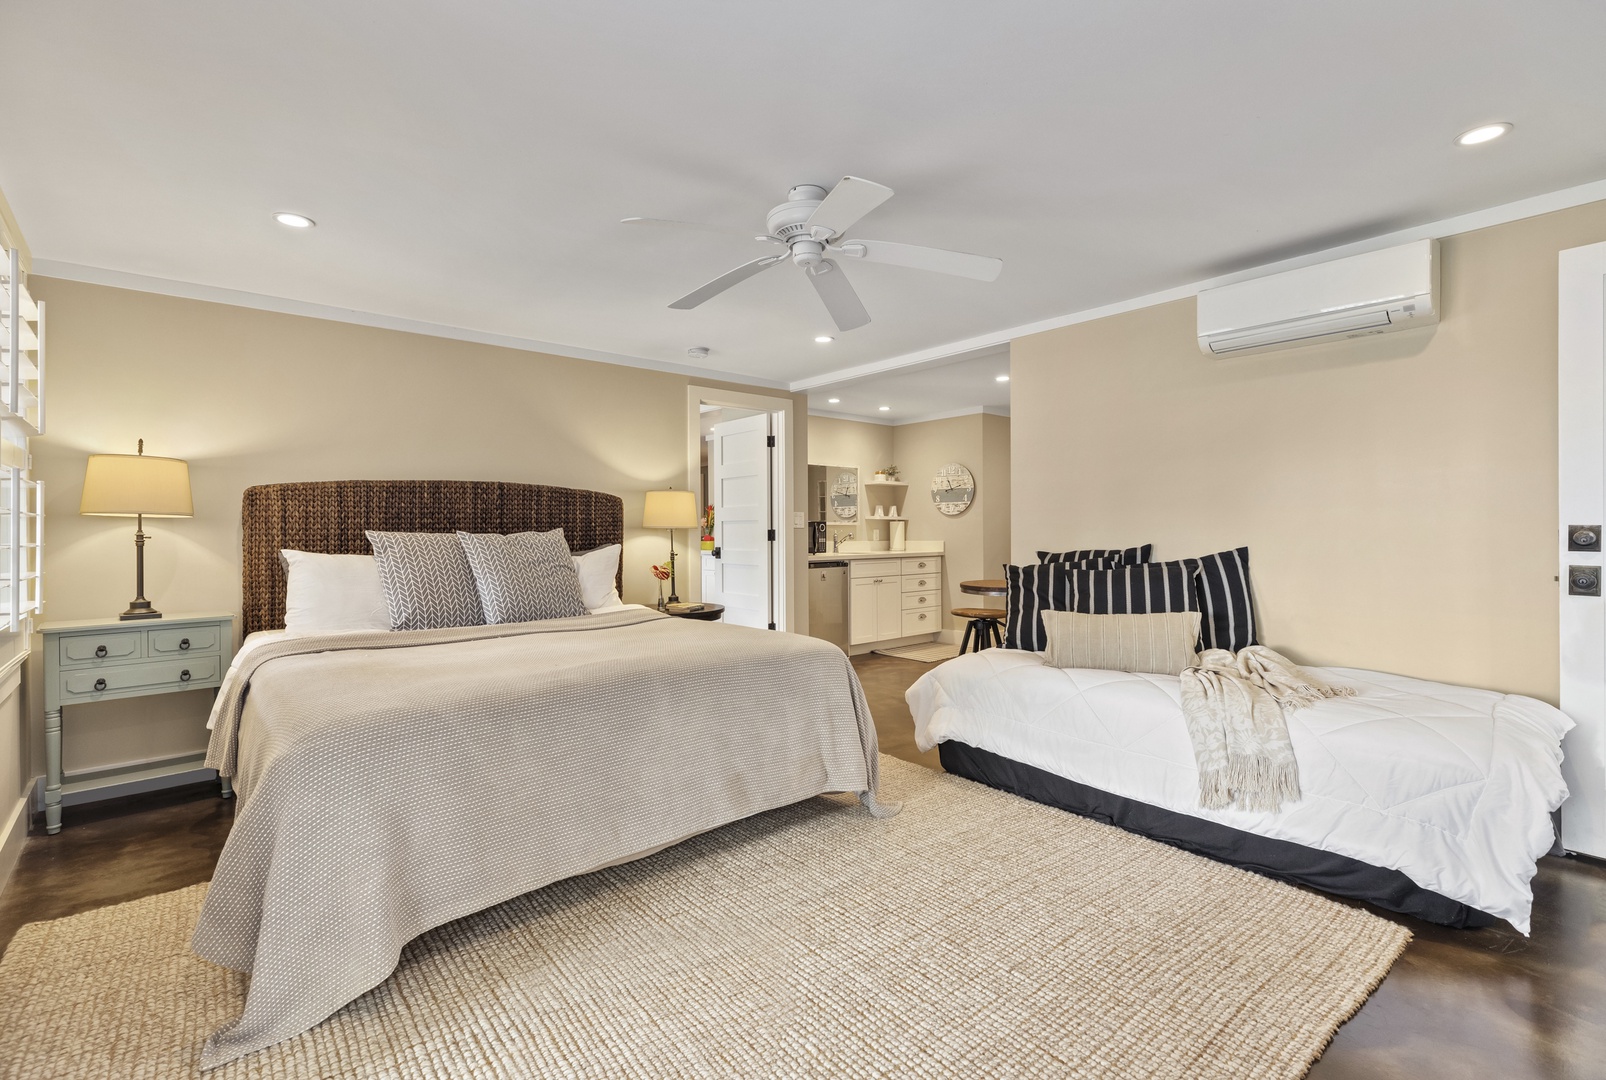 Honolulu Vacation Rentals, Hale Le'ahi* - King-sized bed, AC, and ceiling fan